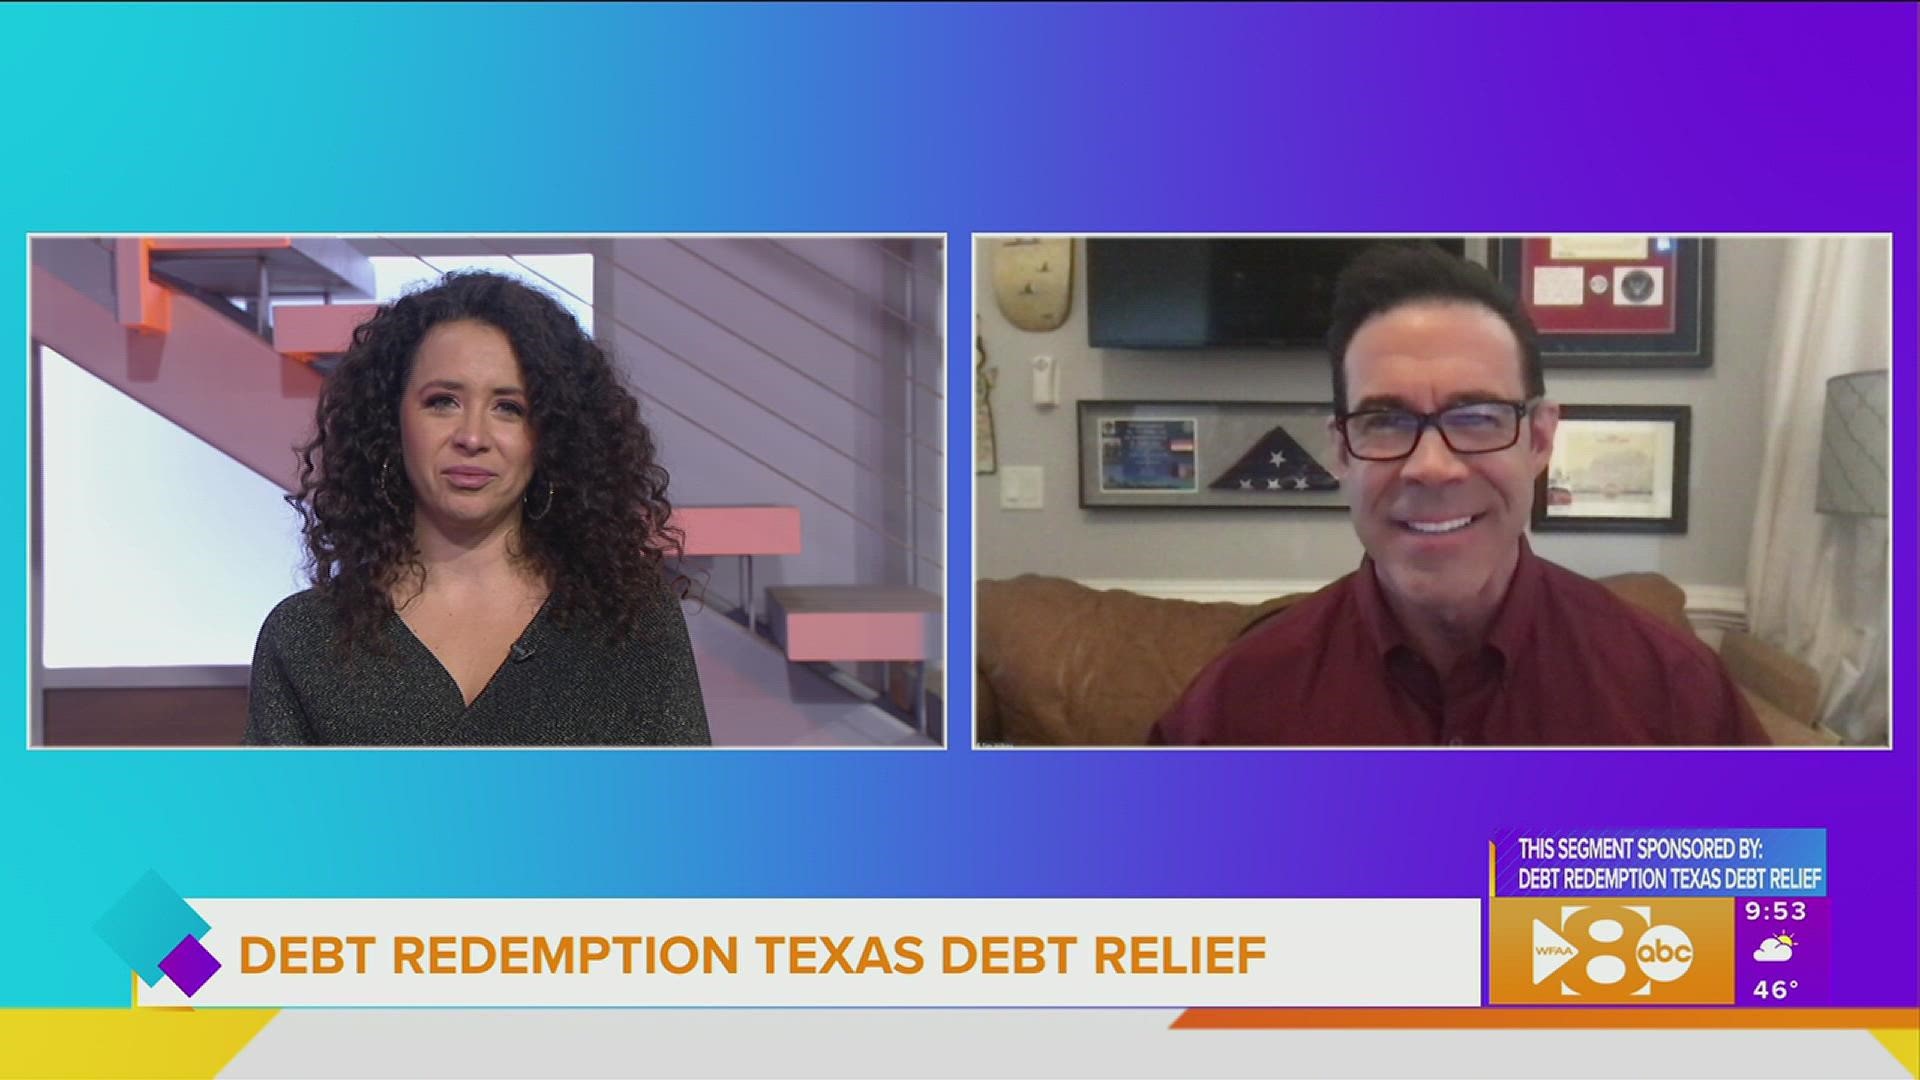 This segment is sponsored by Debt Redemption Texas Debt Relief. Call 800.971.4060 or go to debtredemption.com/wfaa for more information.